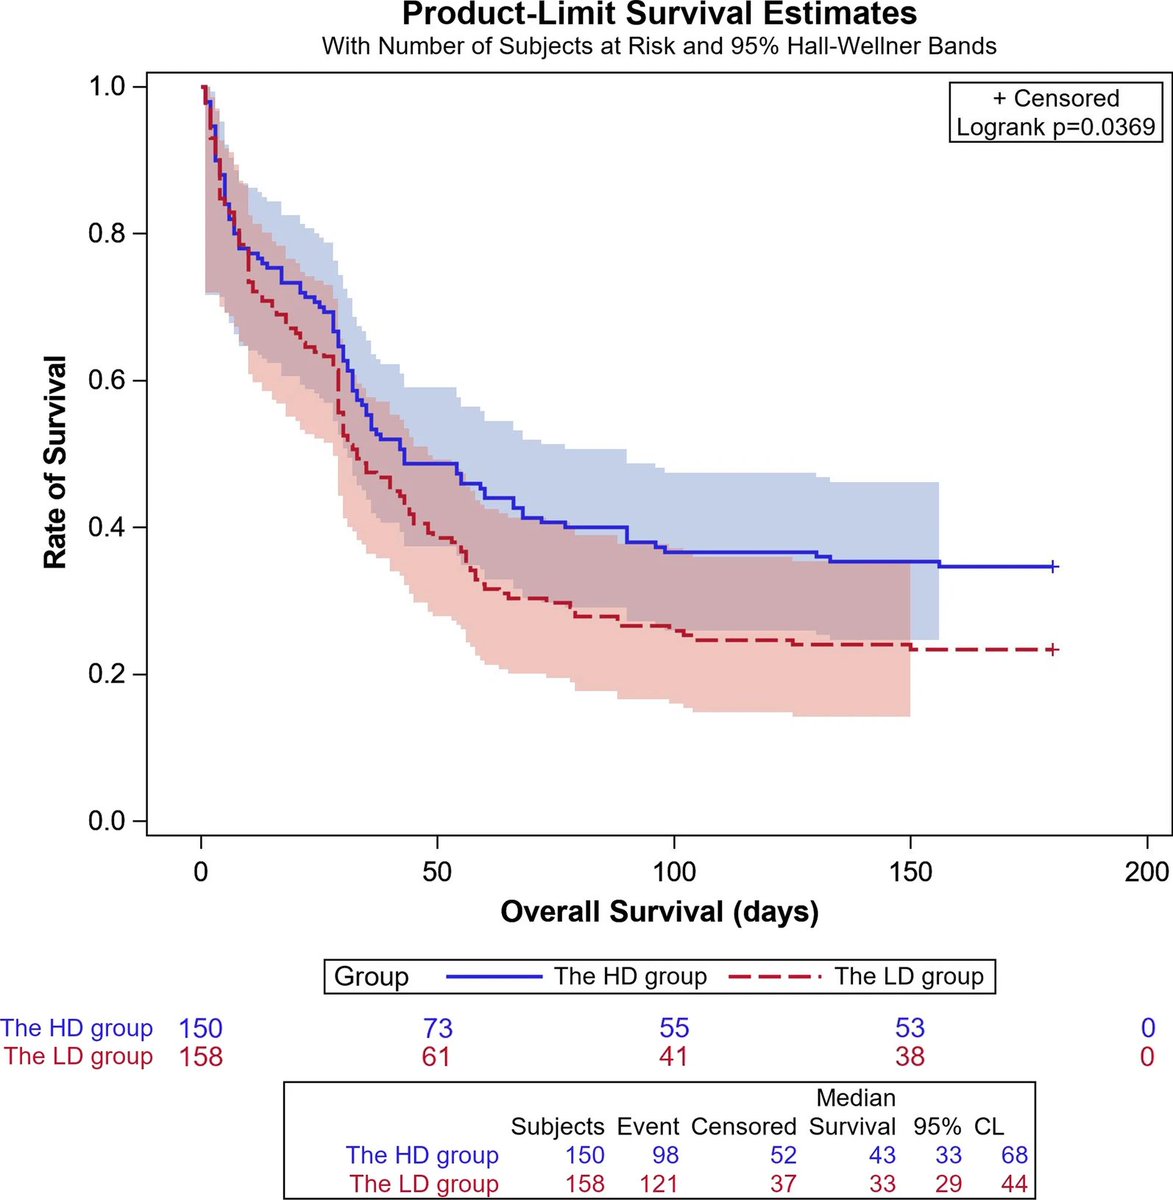 Polymyxin B therapy in septic patients with carbapenem-resistant organisms is safe and improves 180-day survival. #ICRSWWMC #MedTwitter 
ccforum.biomedcentral.com/articles/10.11…